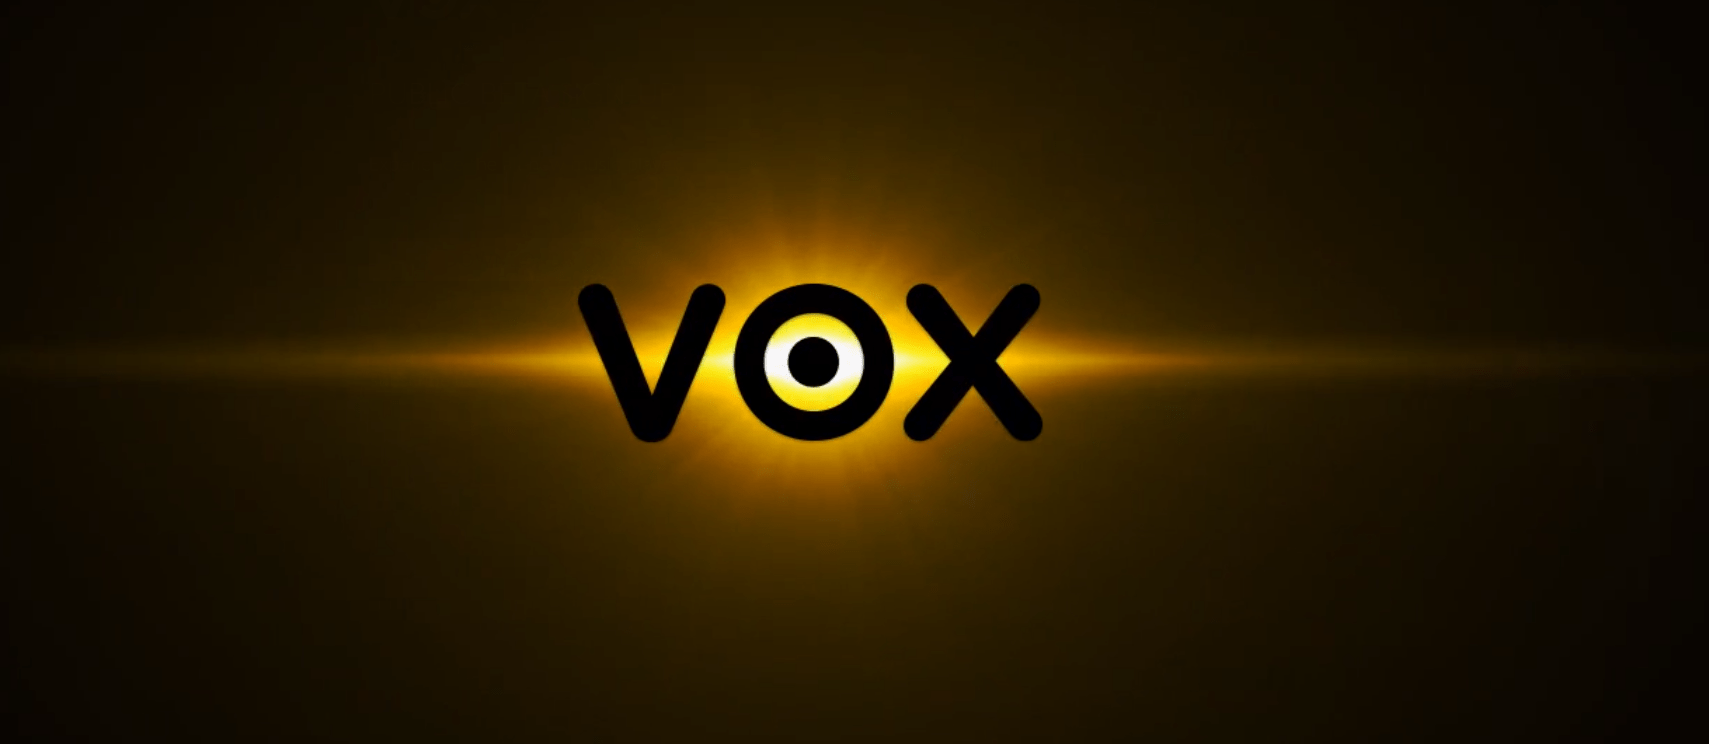 VOX Music Player by Coppertino